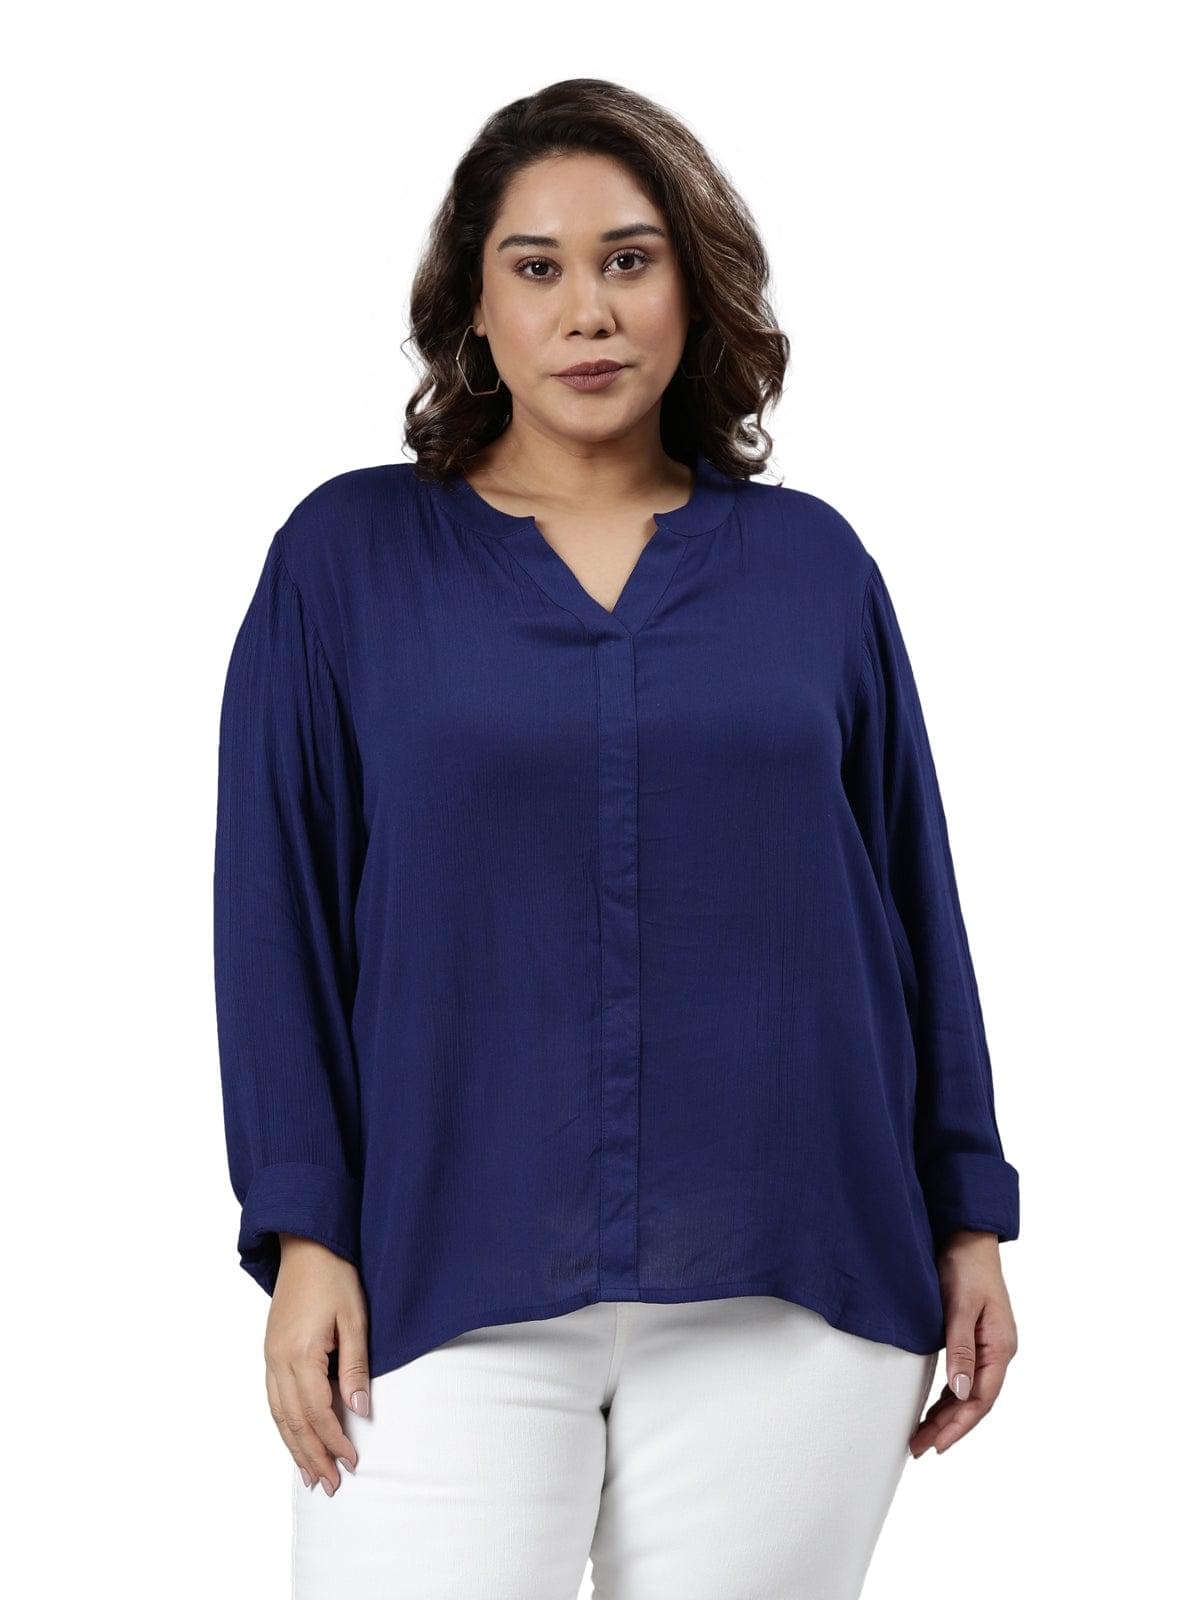 buy  women's blue shirt  online by theShaili at just 999